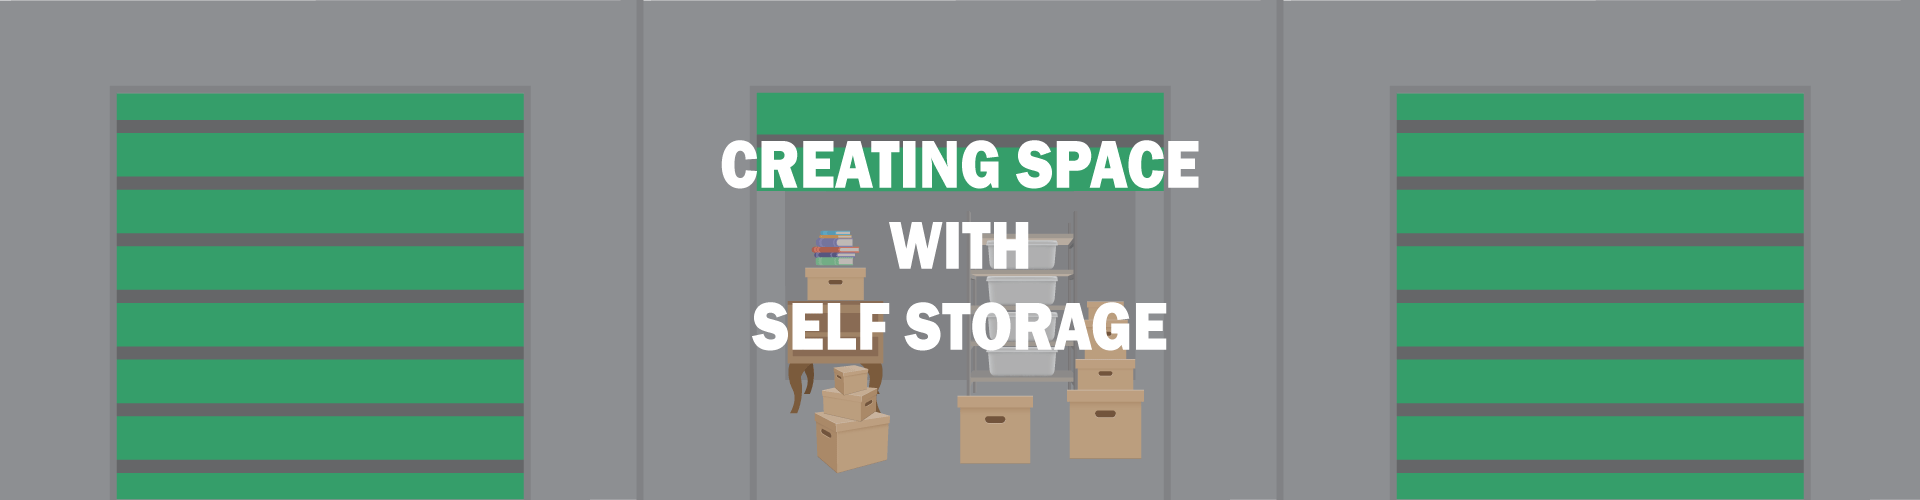 create space with Available Self Storage